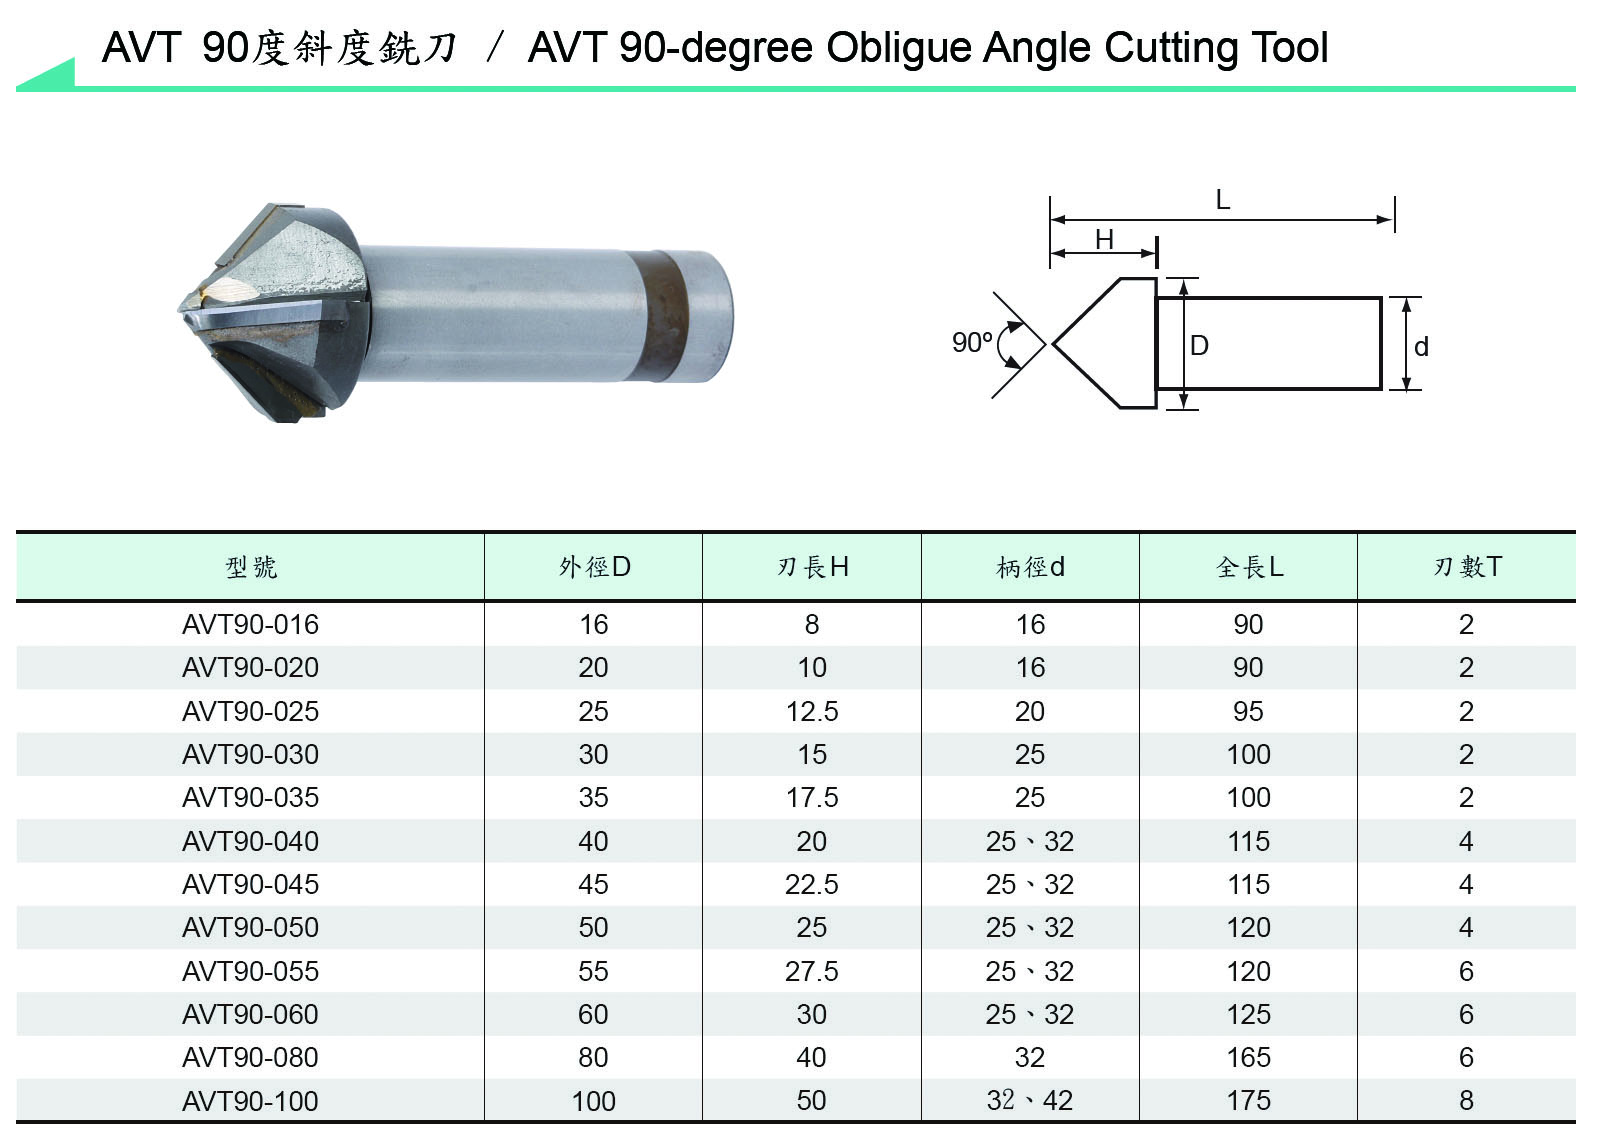 Carbide Tipped Cutter Tool